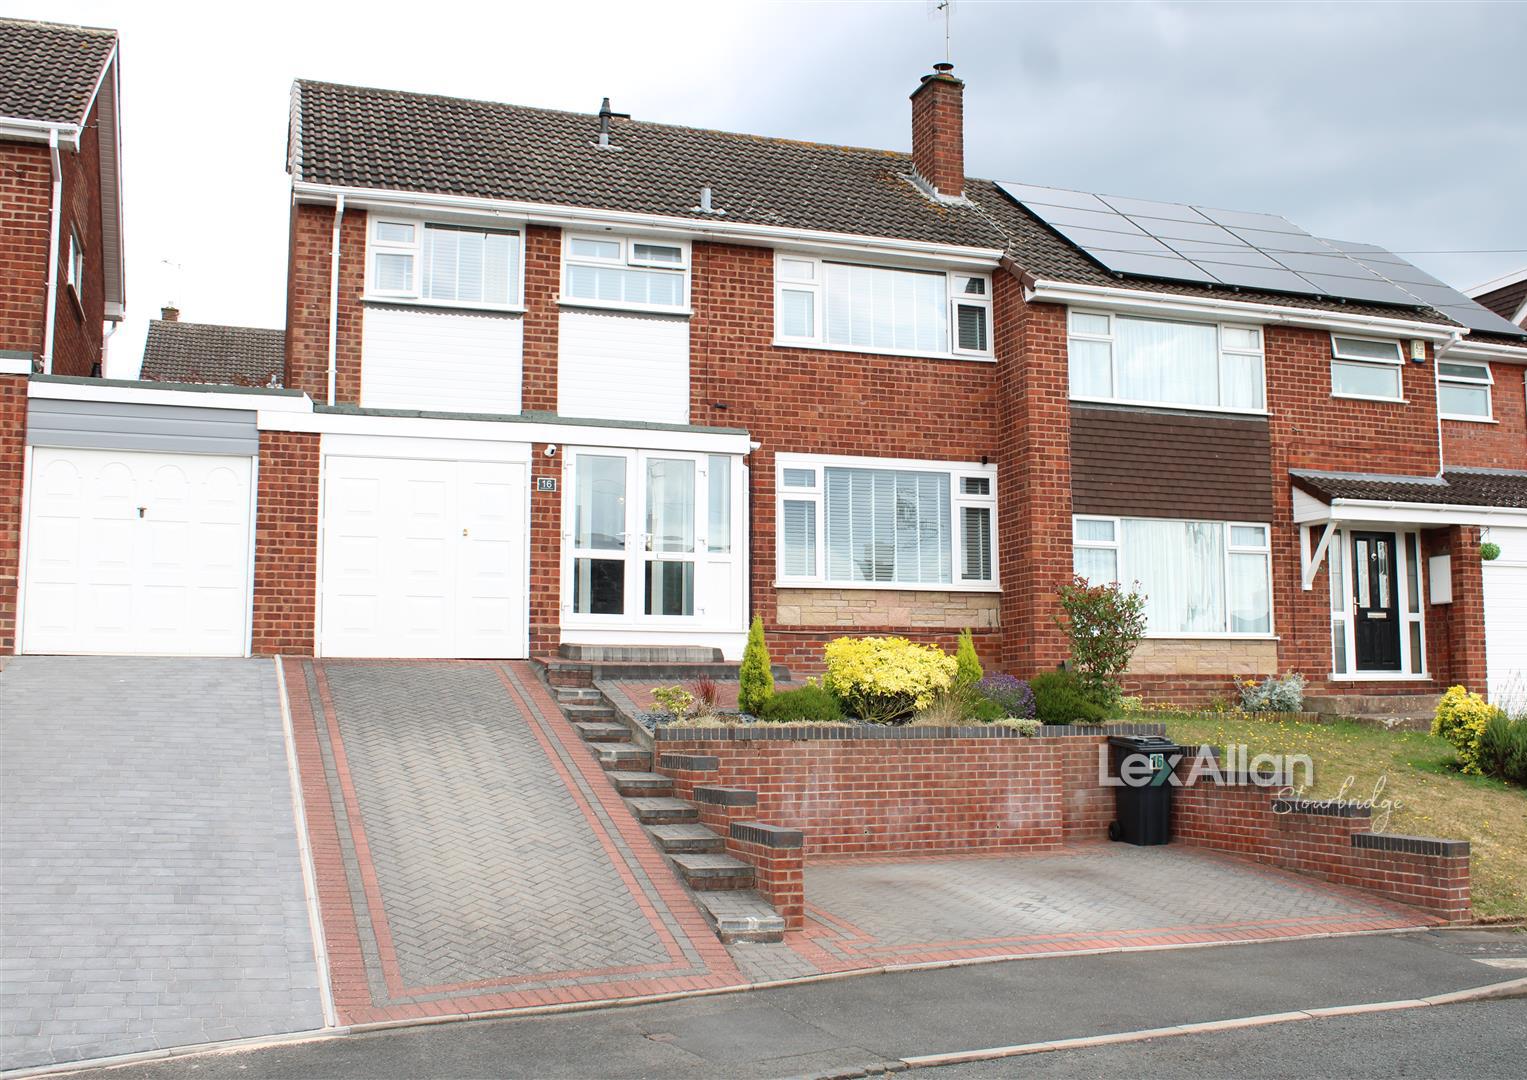 3 bed semi-detached house for sale in Coldstream Drive, Stourbridge - Property Image 1